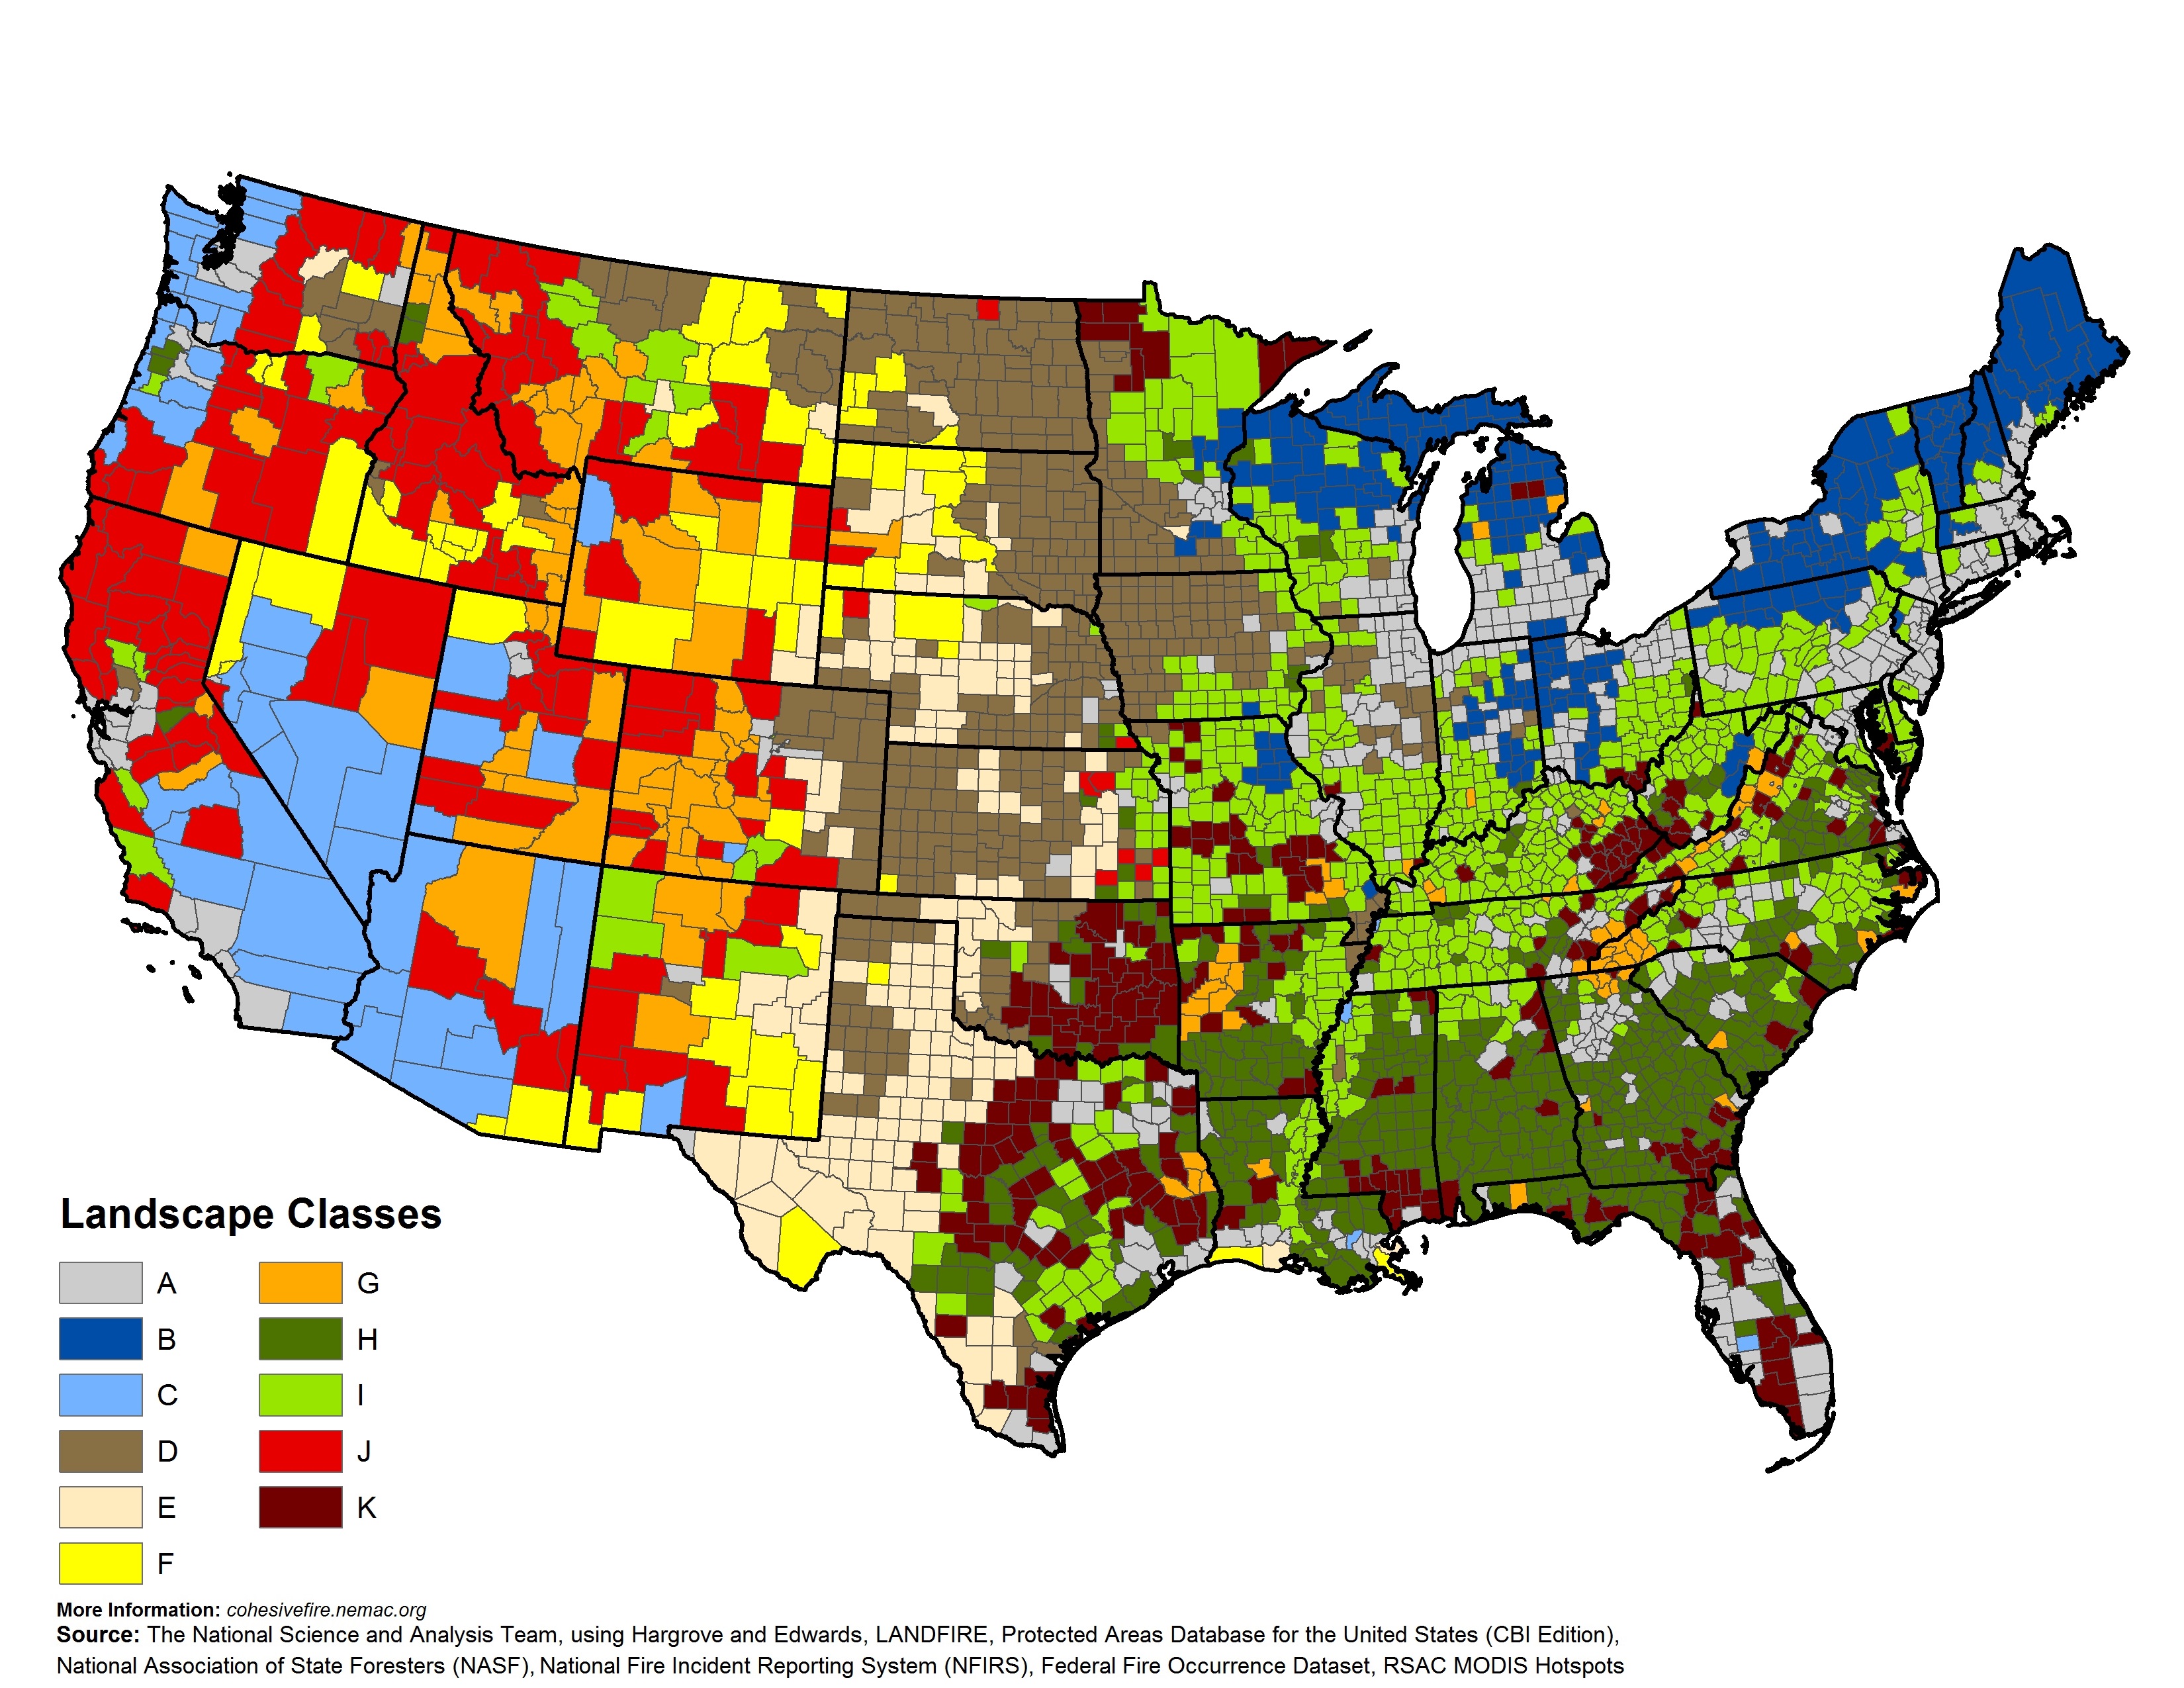 Figure 2.2. Map of the geographical distribution of the 11 landscape classes across the conterminous United States.